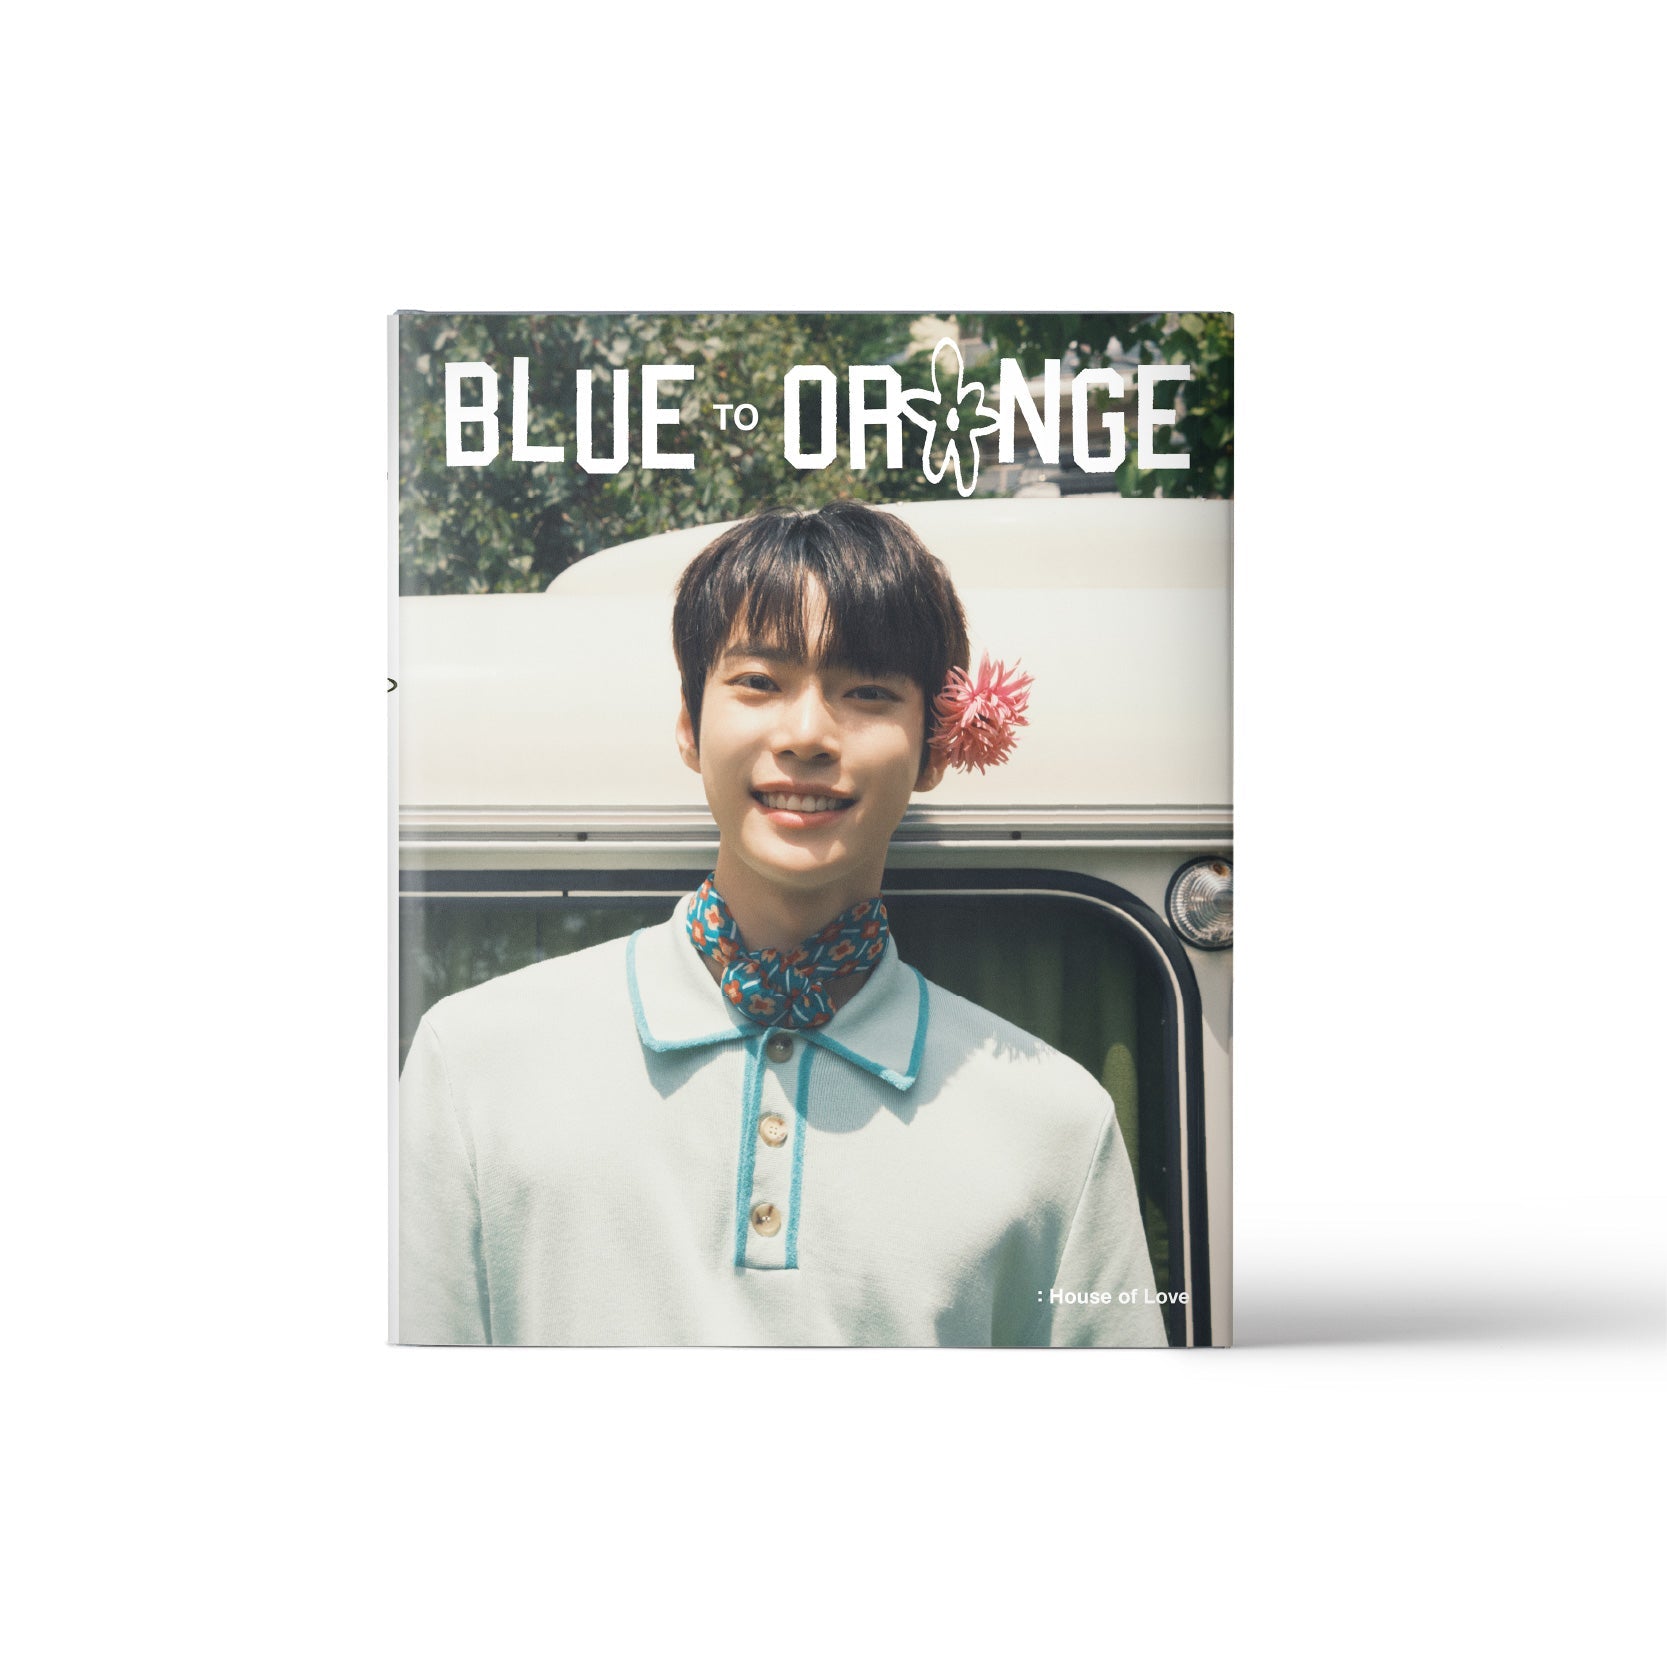 NCT 127 PHOTOBOOK 'BLUE TO ORANGE : HOUSE OF LOVE' DOYOUNG VERSION COVER